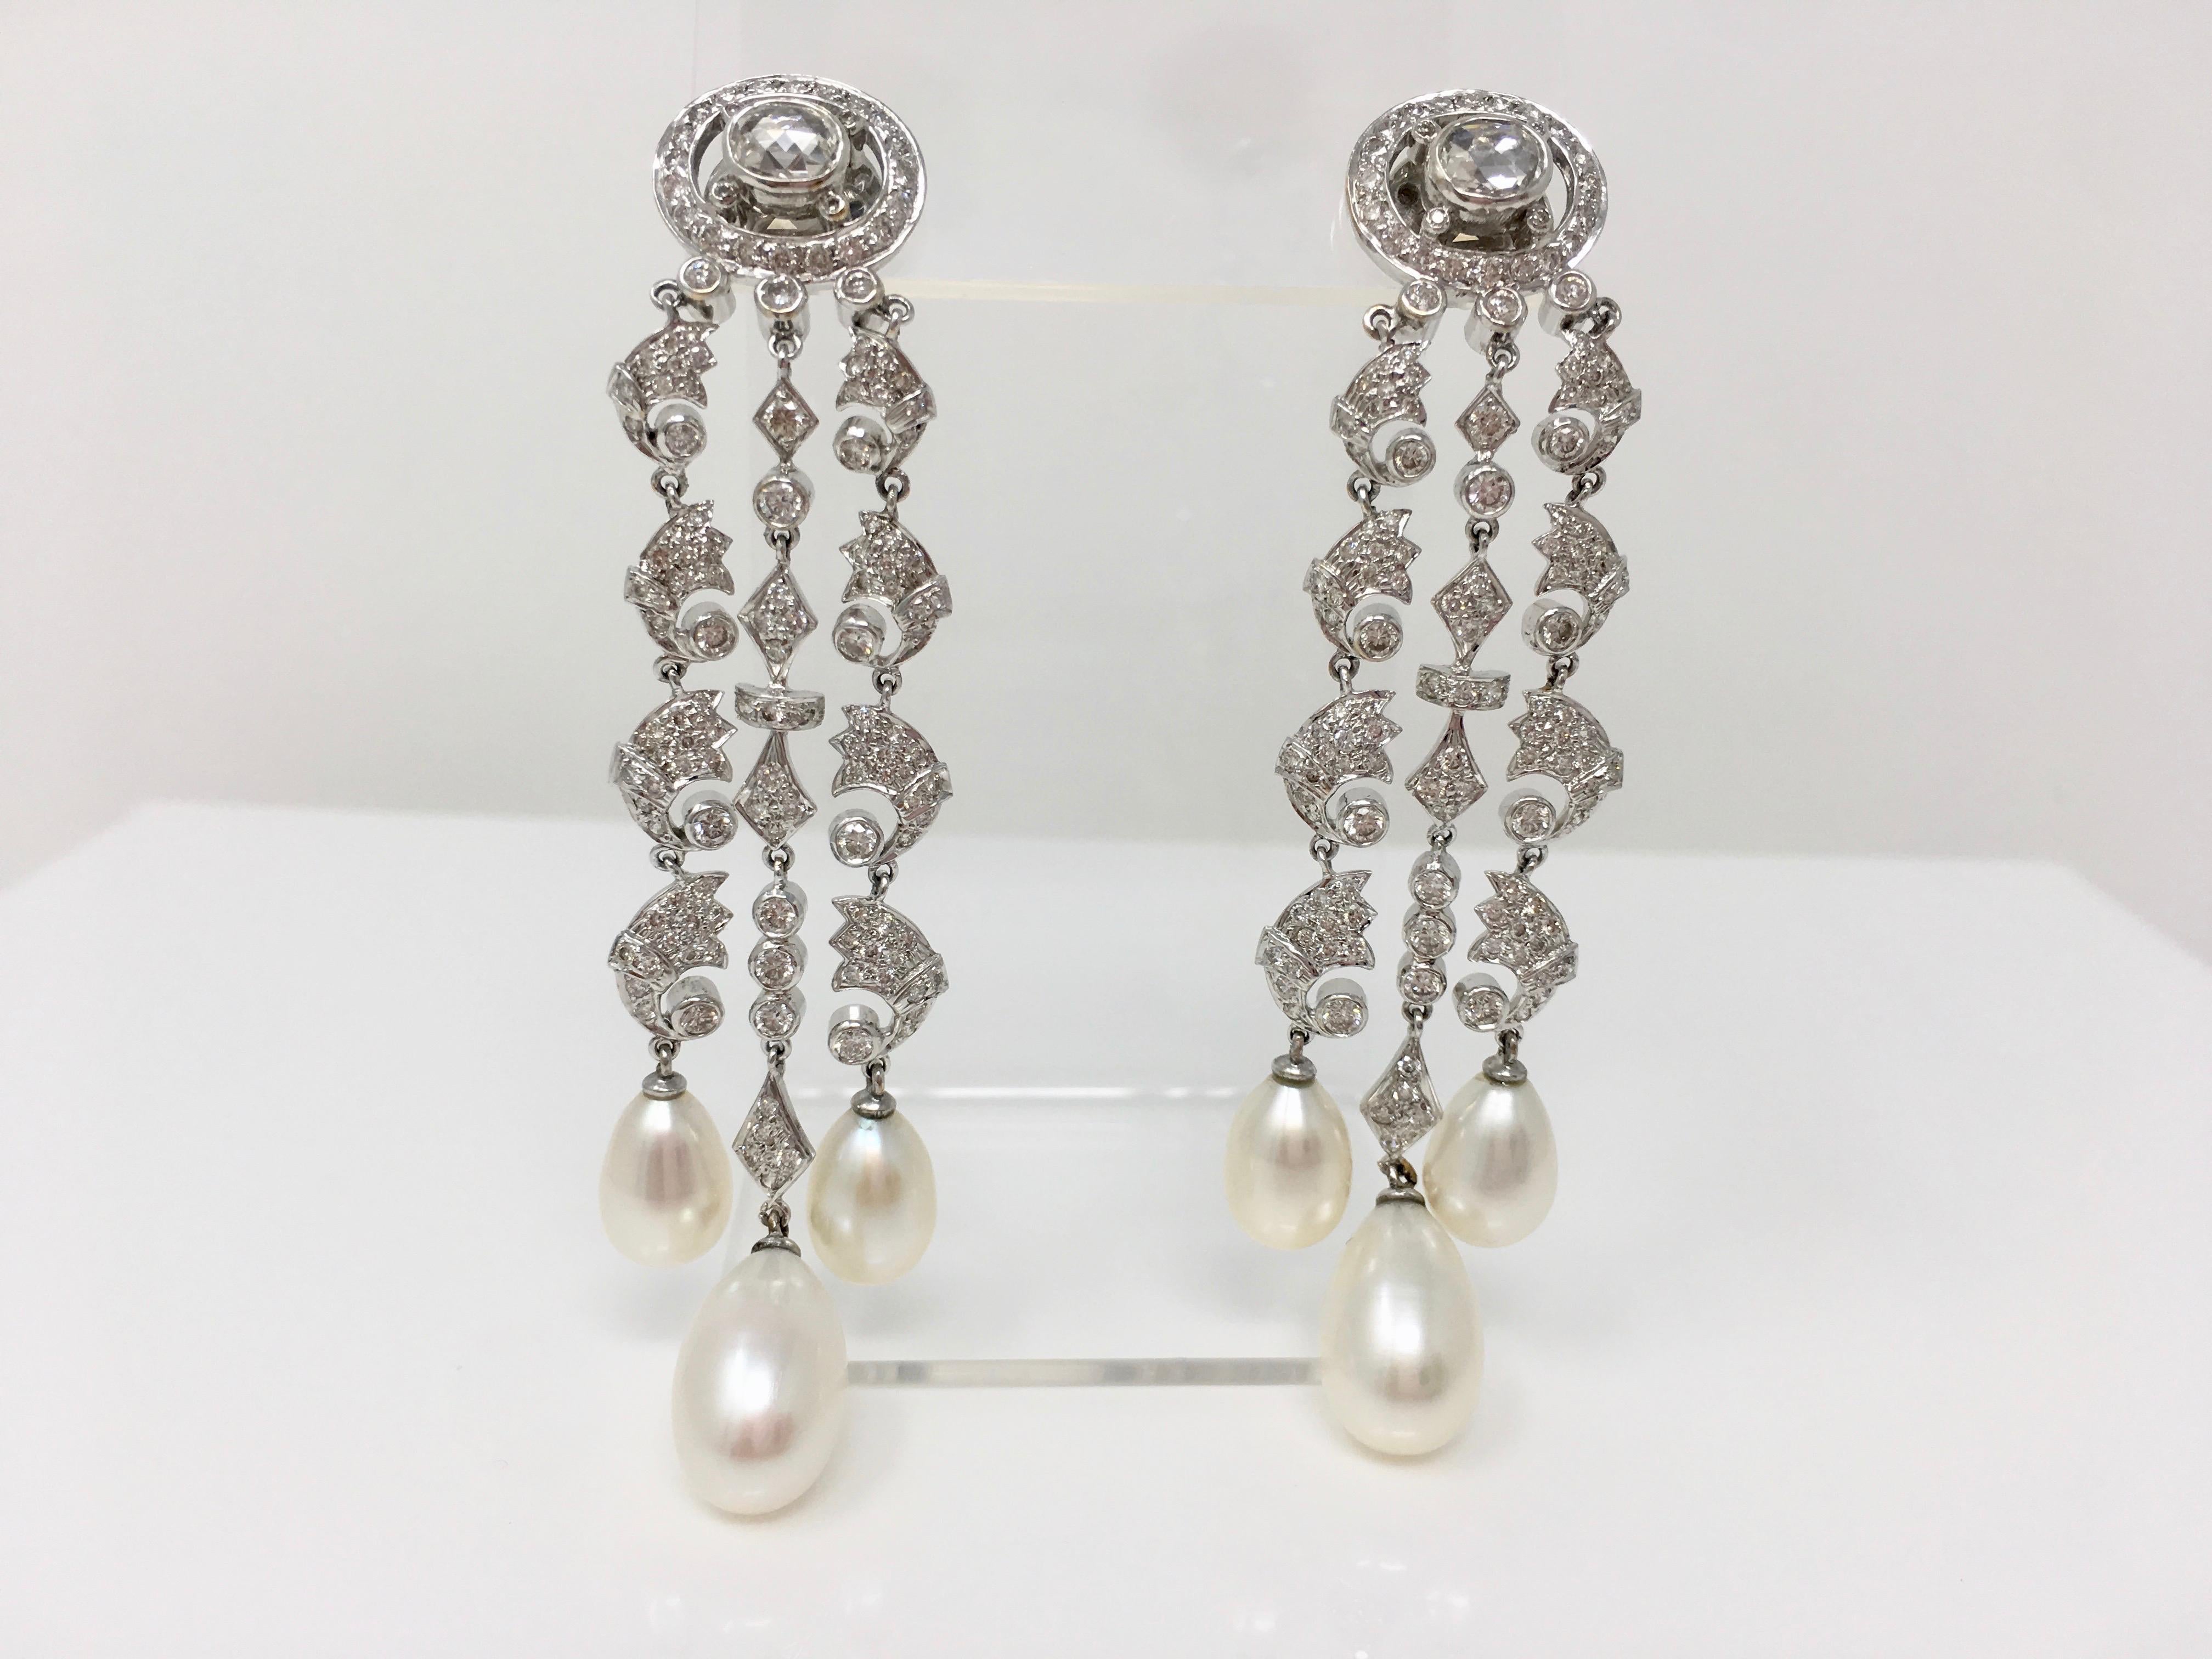 White Round Brilliant Diamond And White South Sea Pearl Earrings In 18k Gold.  For Sale 1